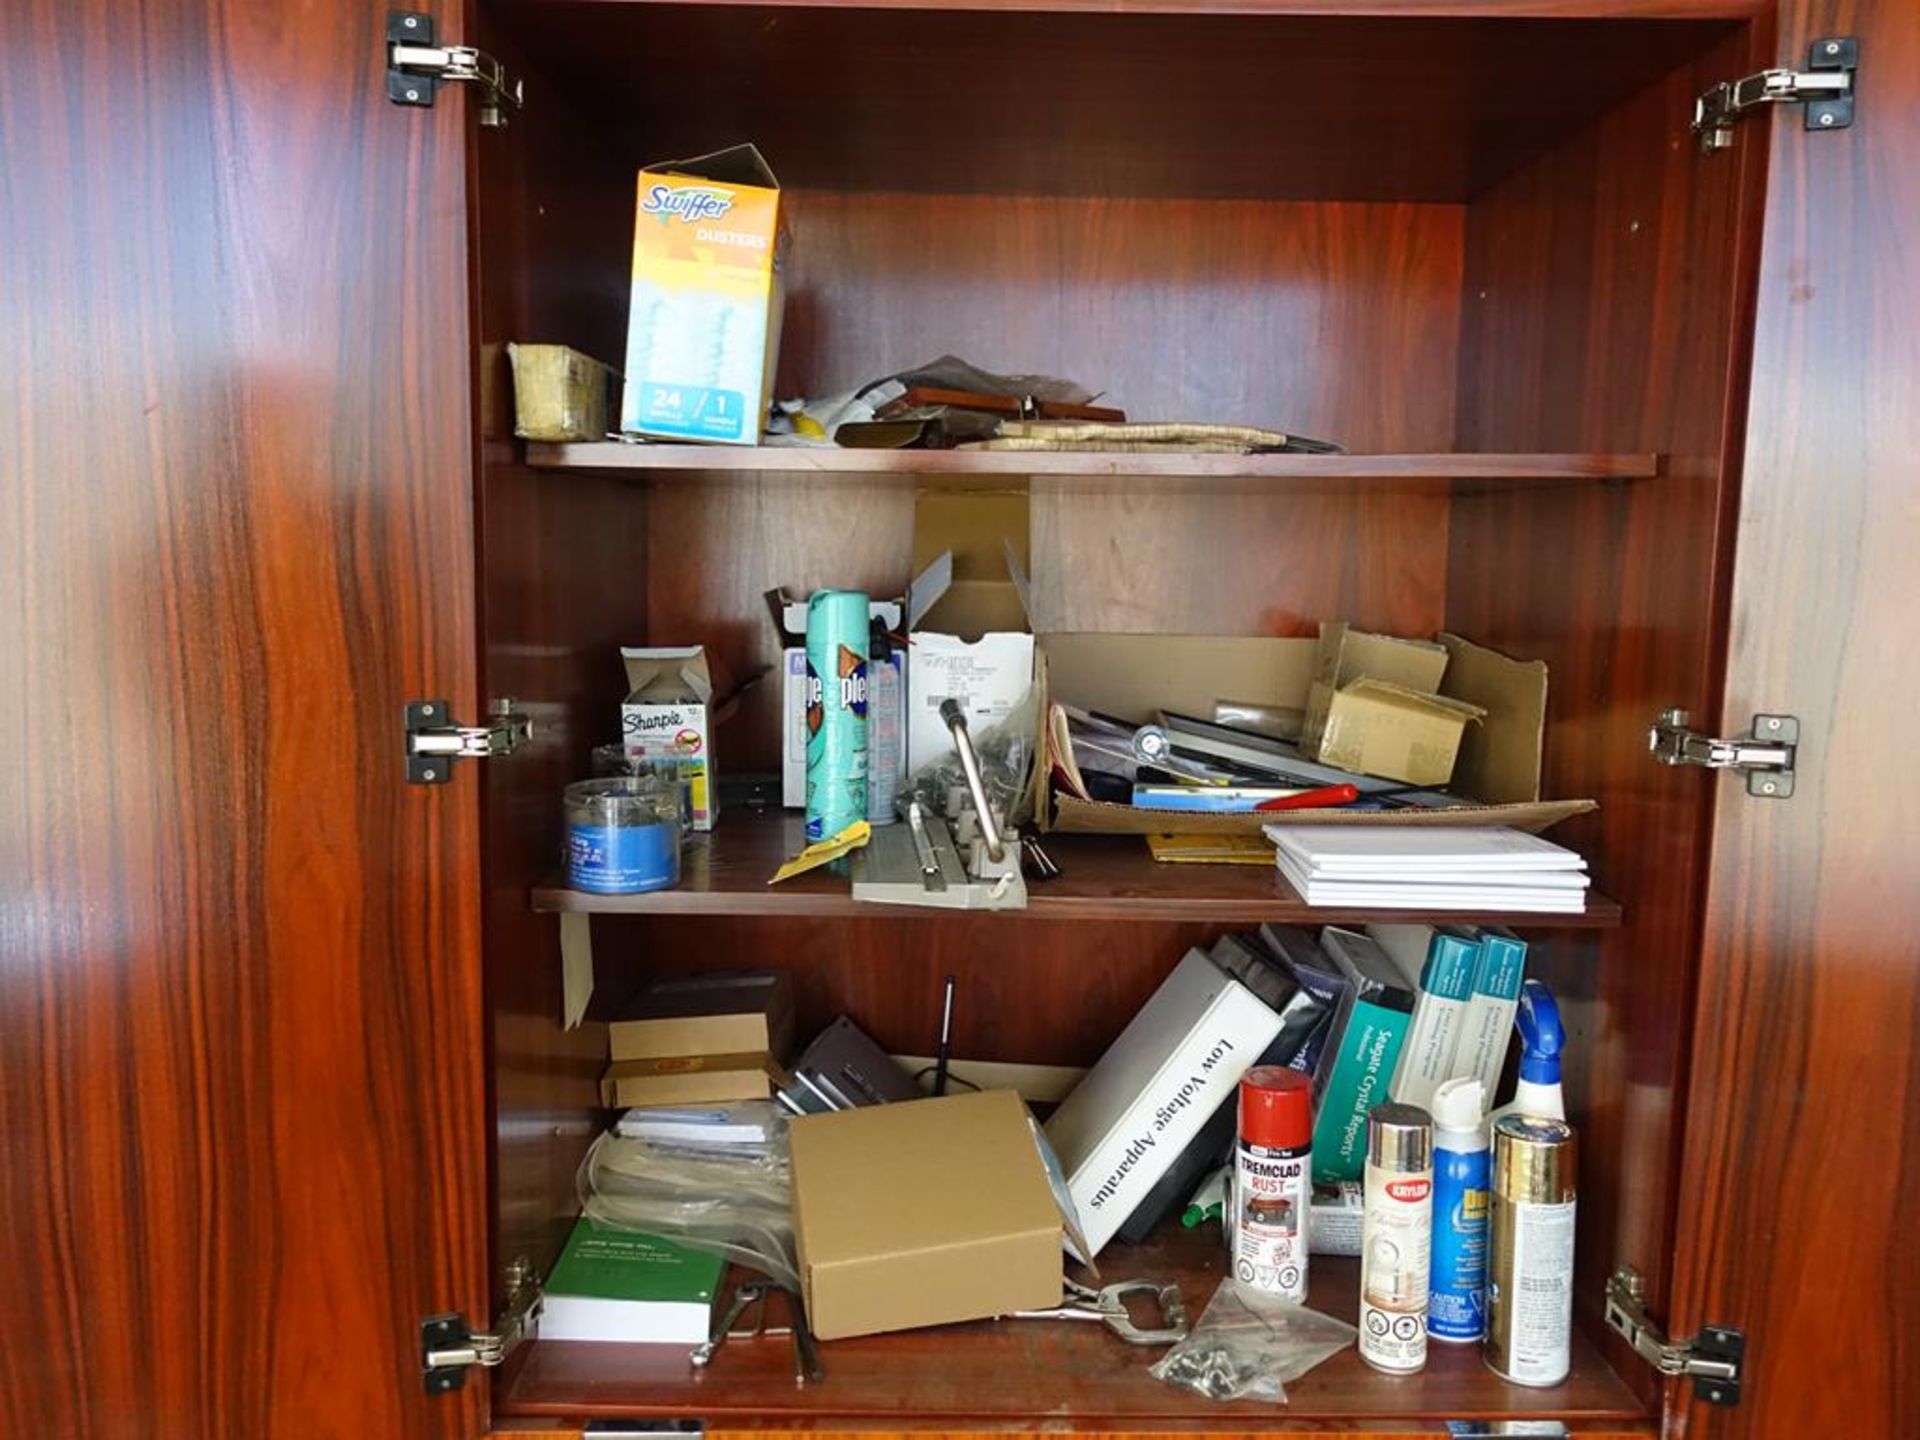 CONTENTS OF SUPPLY CABINET